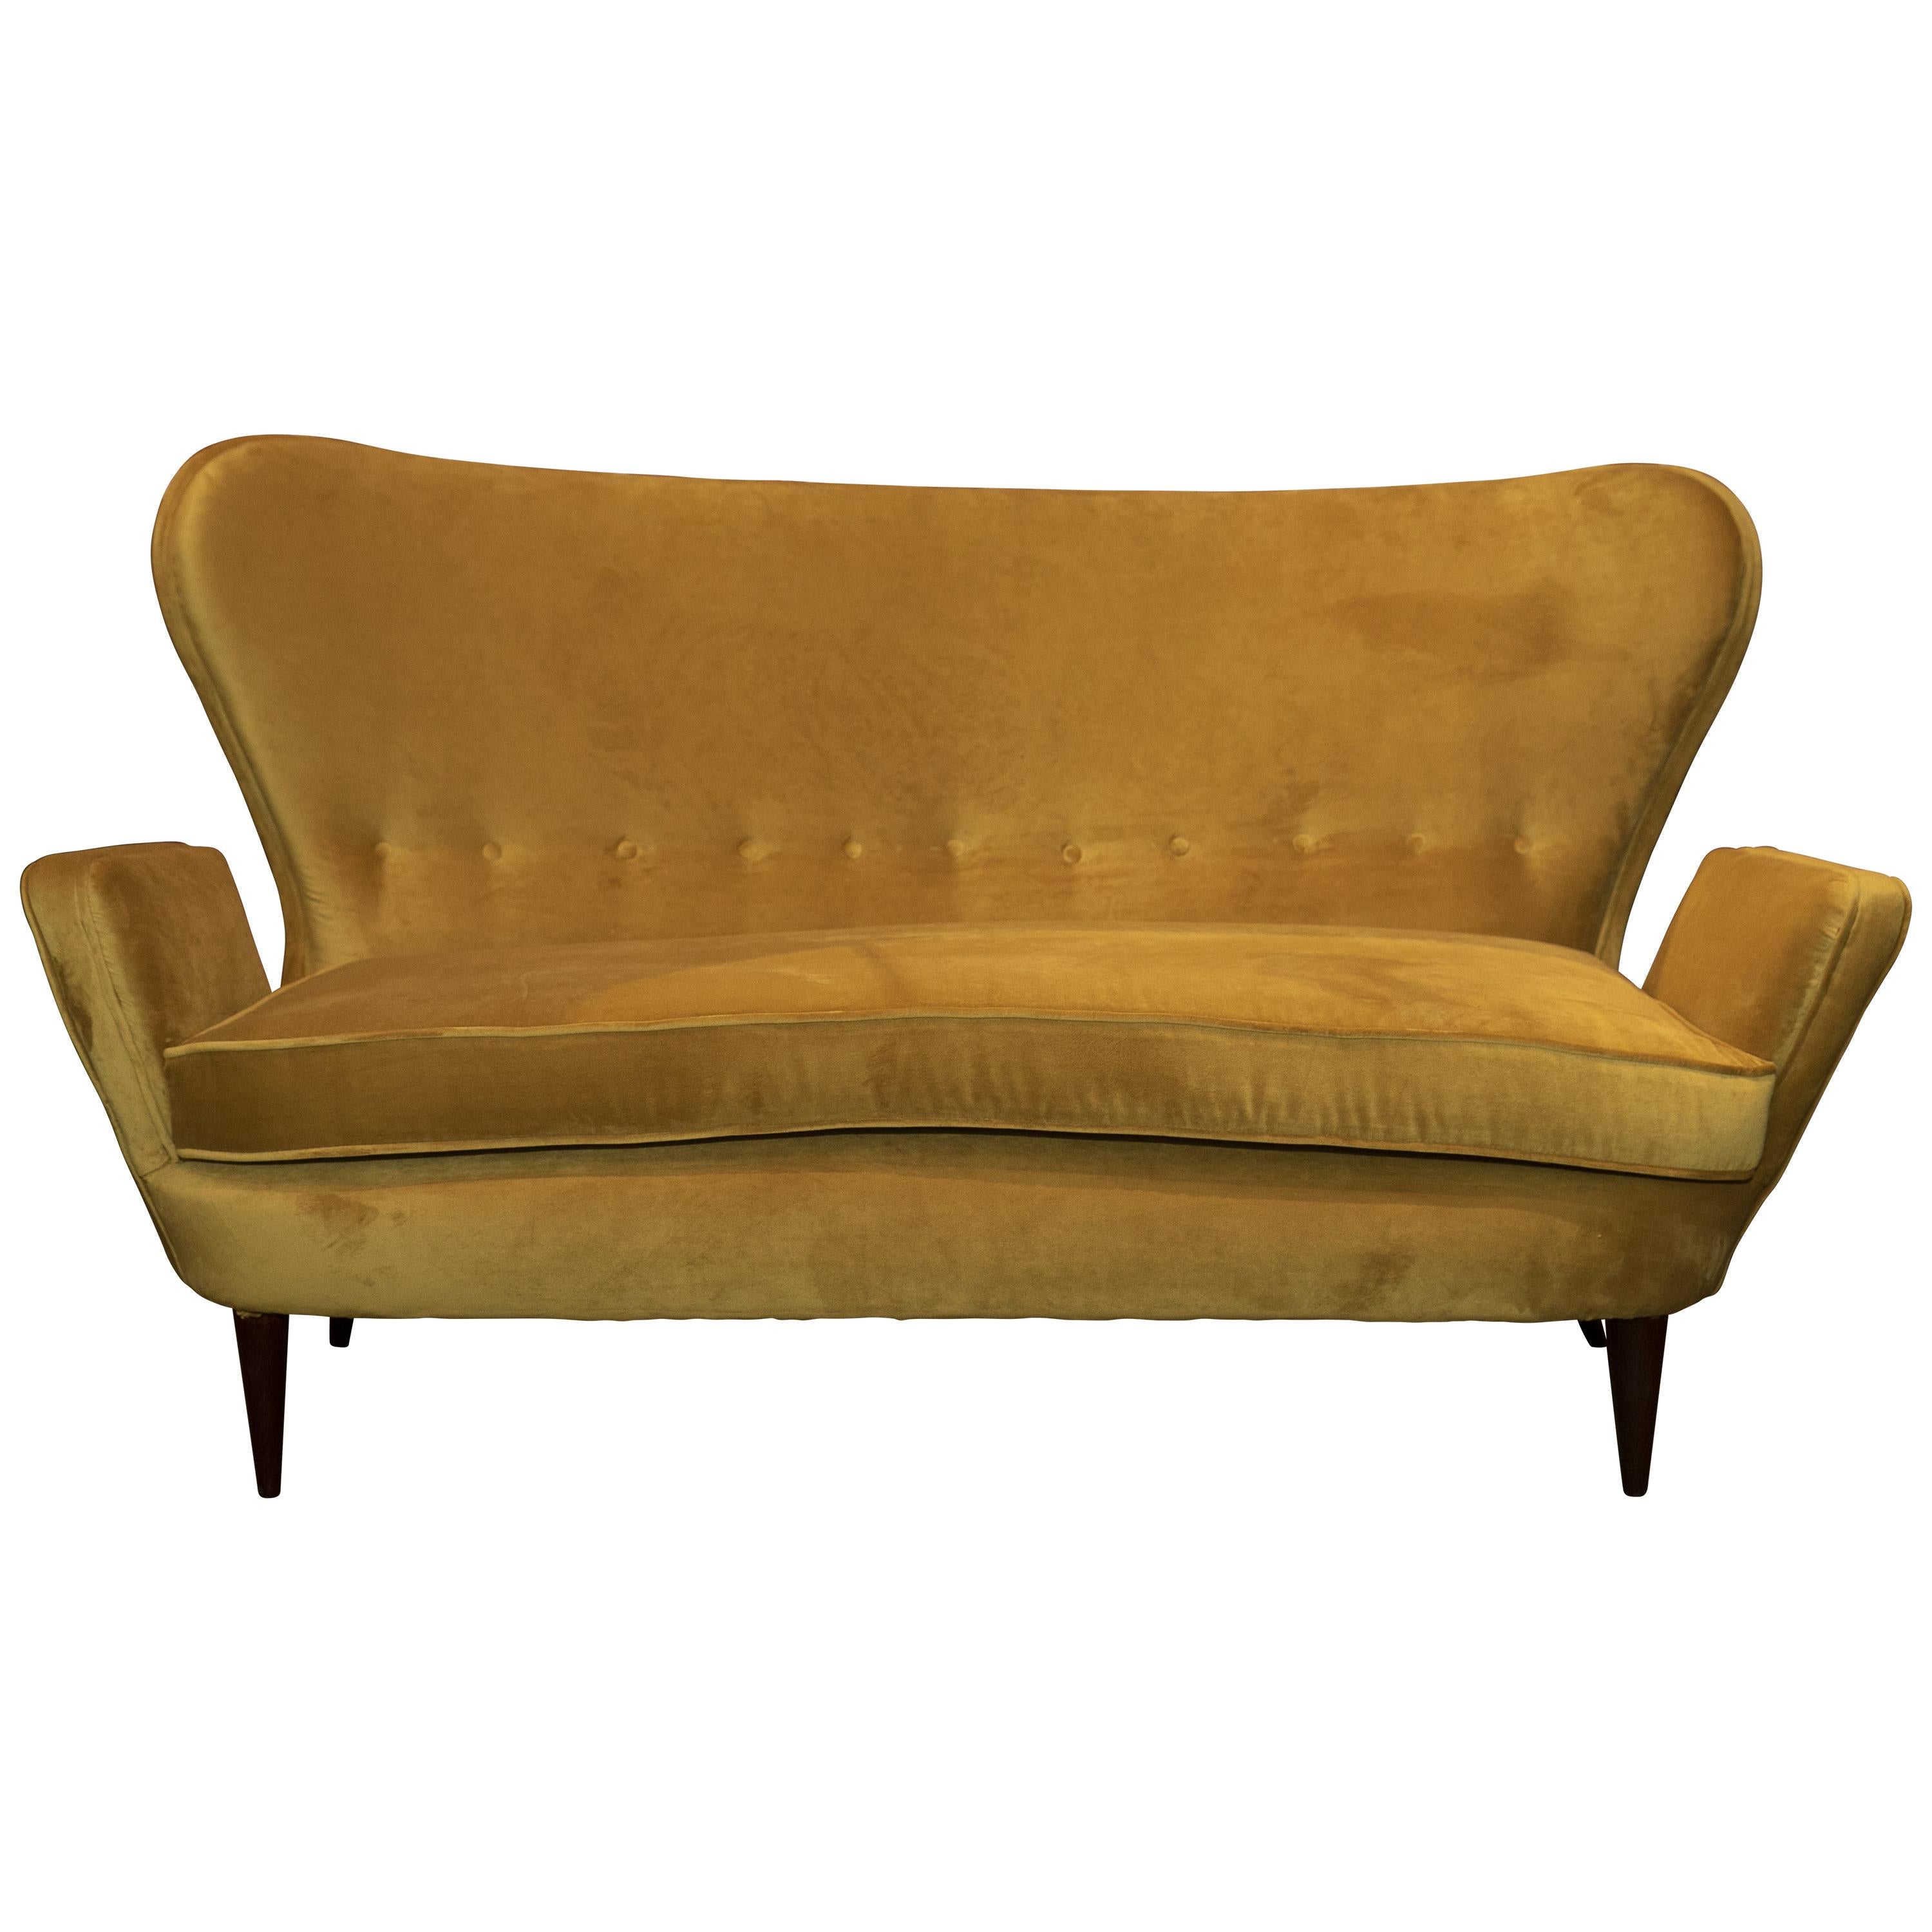 1980s Sofa and Armchair, New Ocher Coating and Upholstery, Made in Italy 1980's For Sale